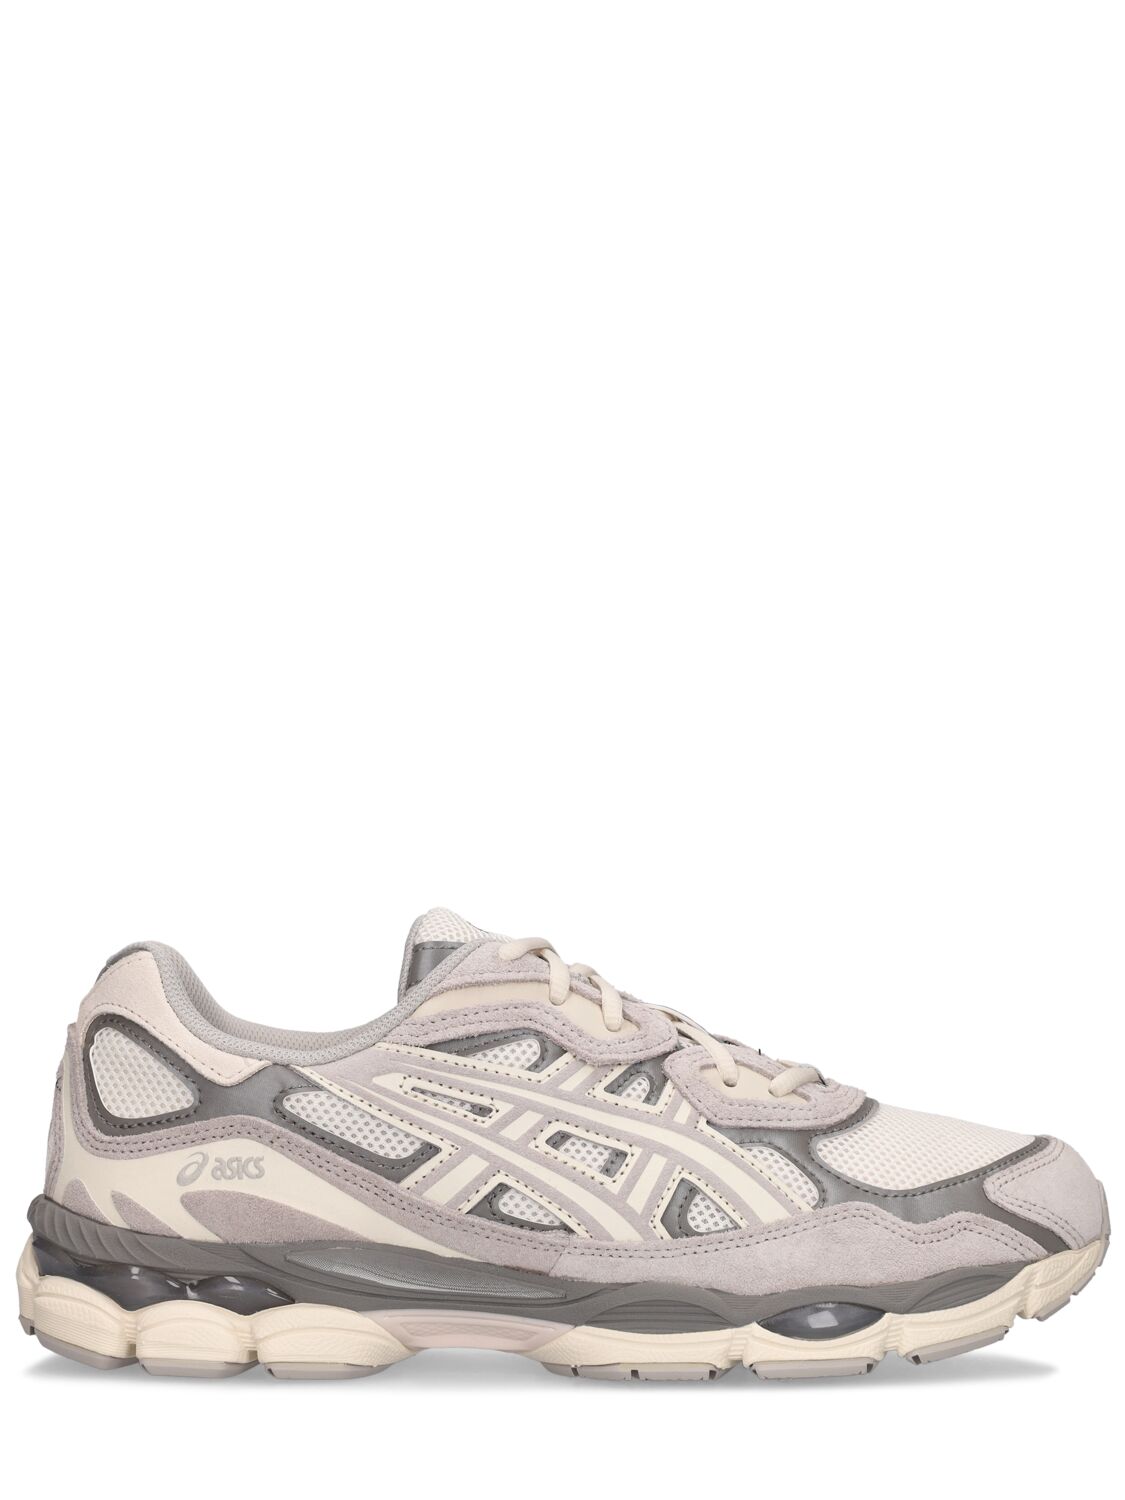 Asics Gel-nyc Suede Sneakers In Cream,oyster